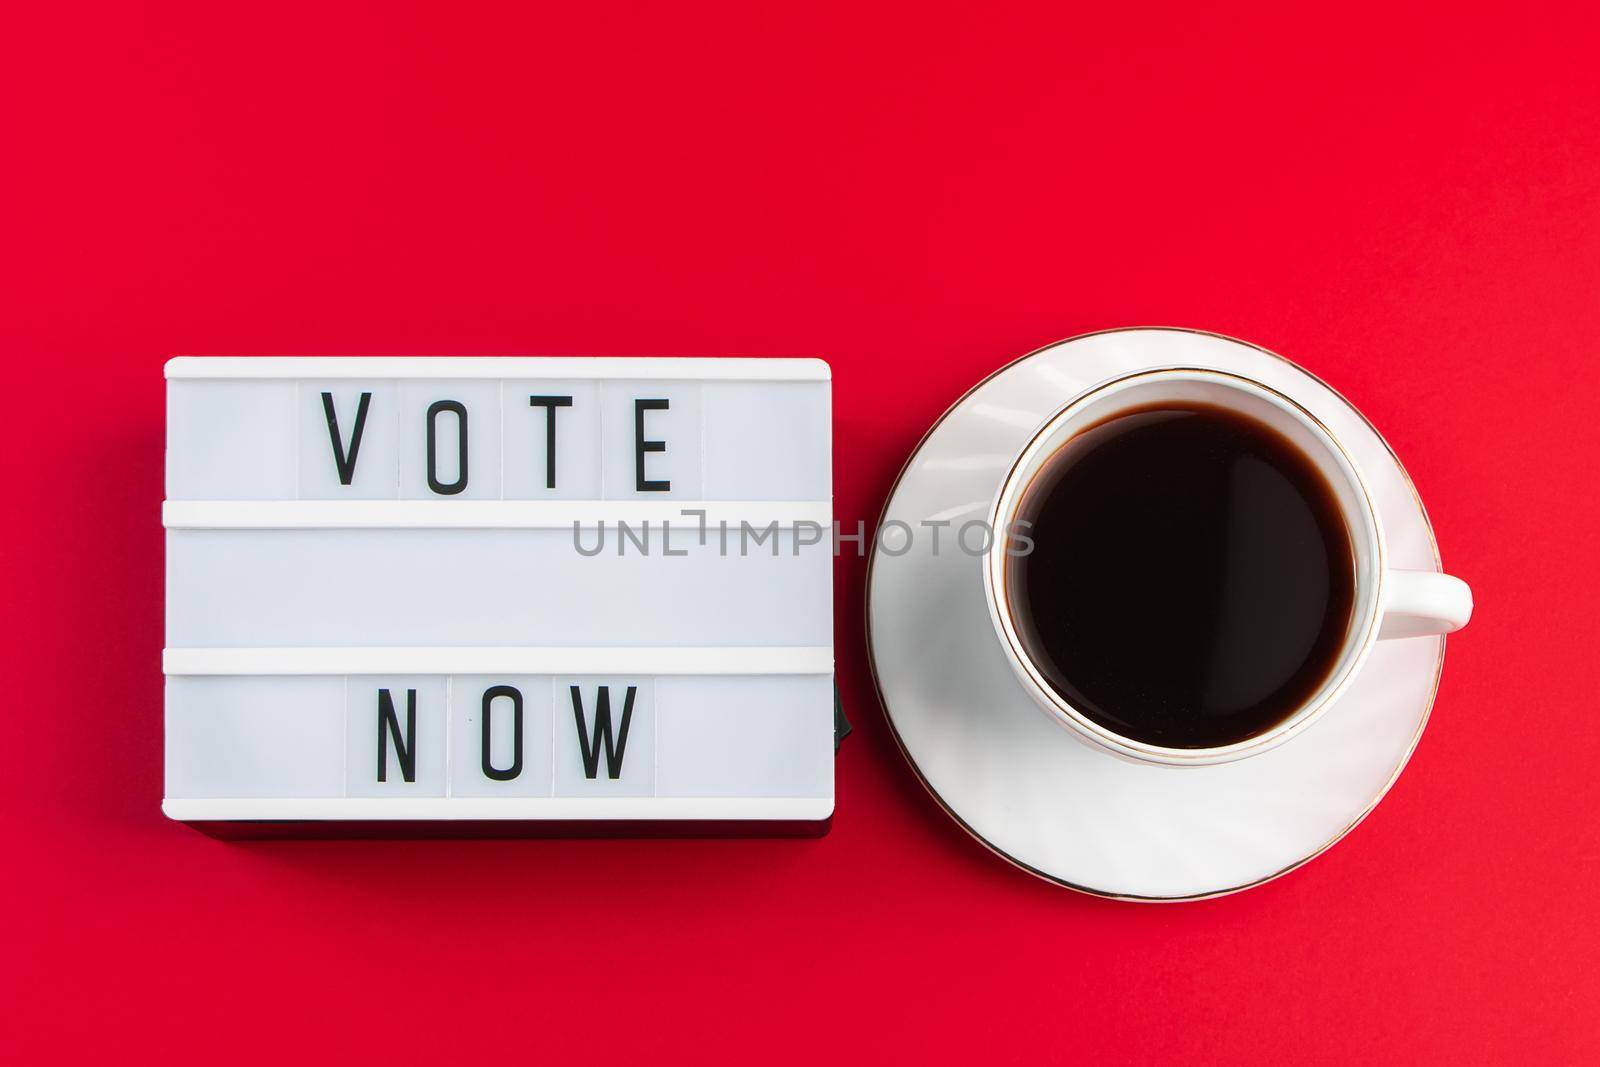 Vote now. Sign and cup of coffee on red background. Election voting concept. by Statuska